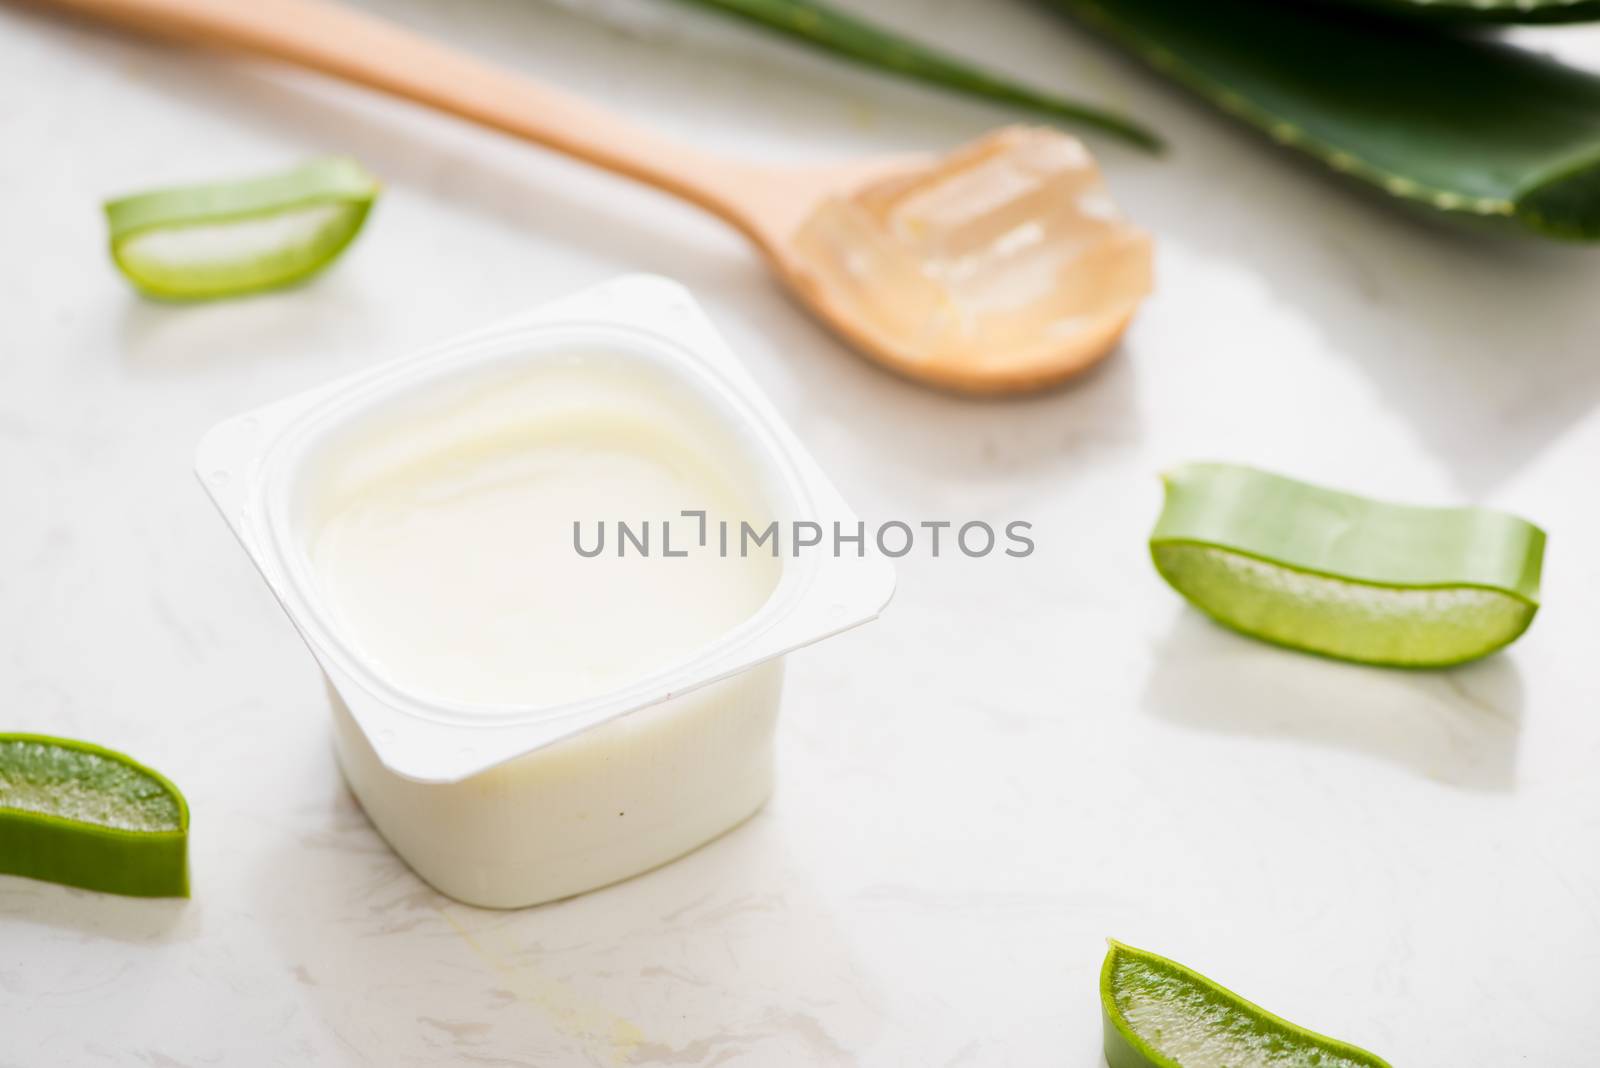 Aloe vera yogurt with fresh leaves on a wooden table by makidotvn